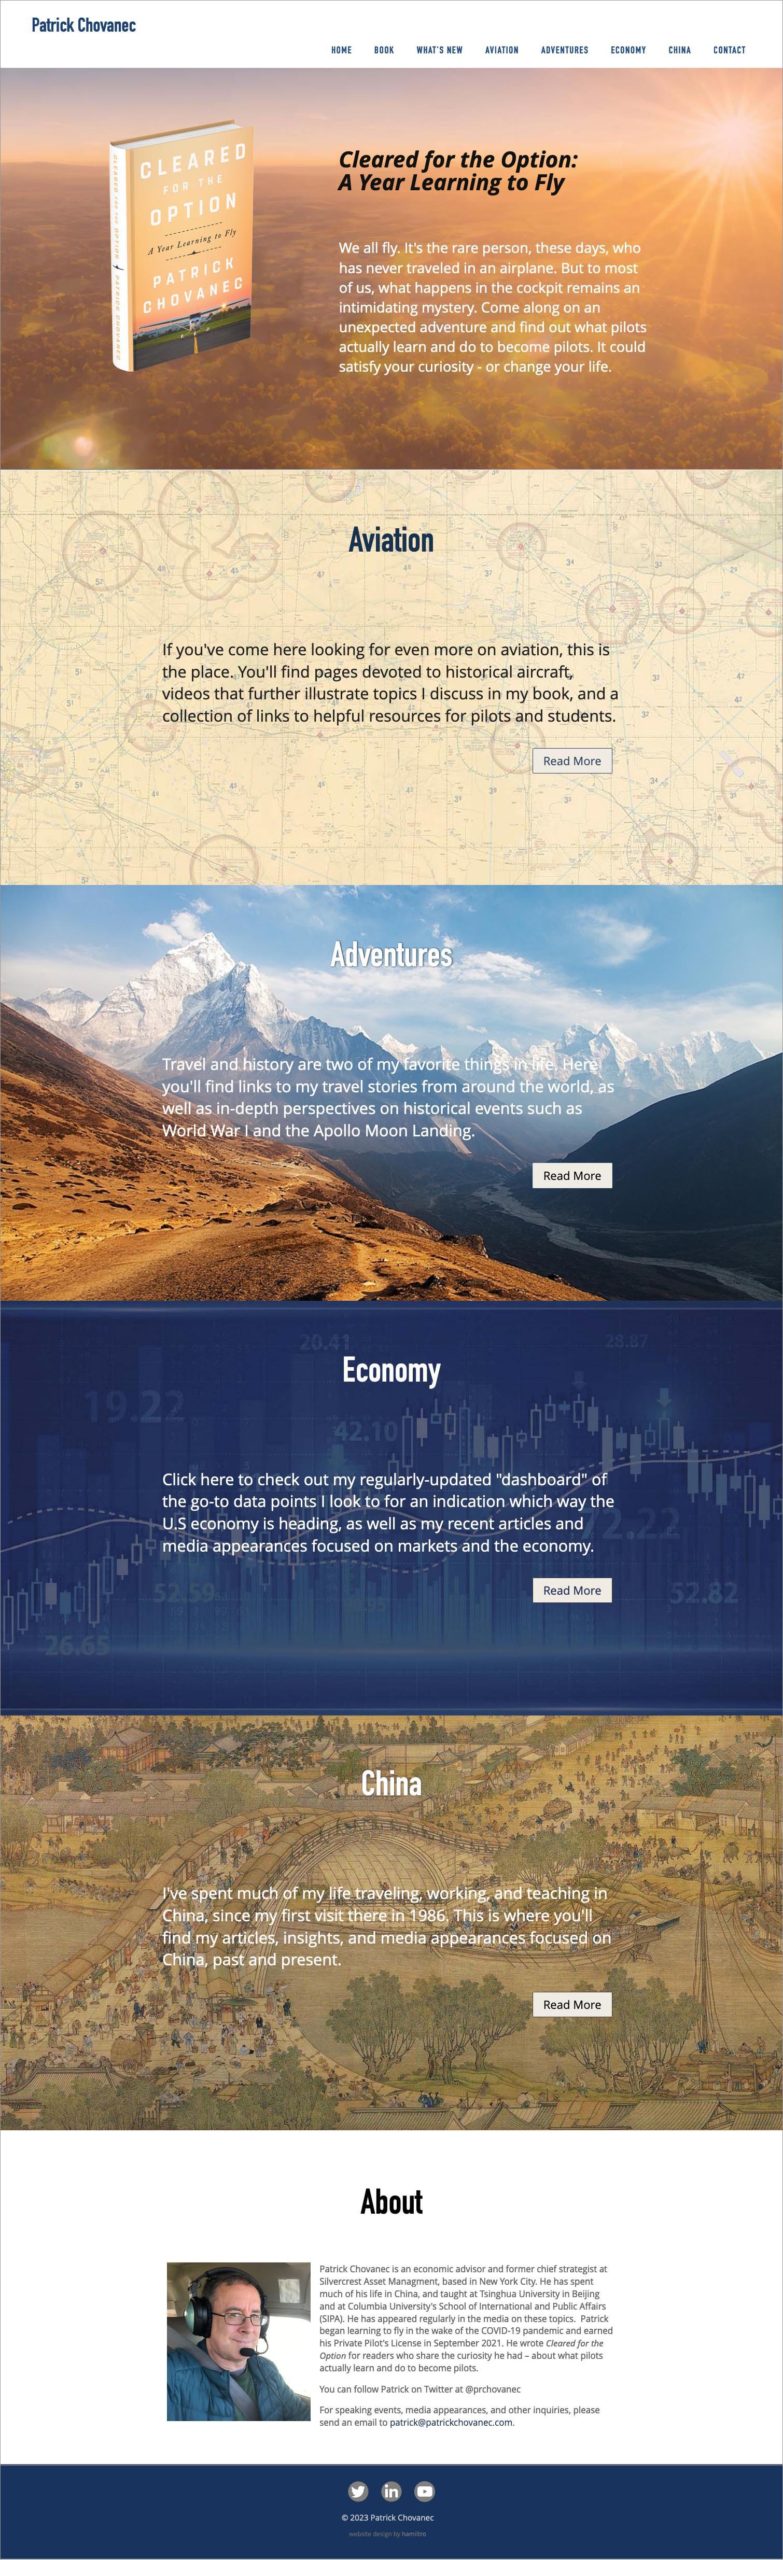 Website design for an economic advisor and author in New York. The long-scrolling homepage opens with a section promoting the author's new book and is followed by sections introducing the author's interests in aviation, adventures, economy and China. Each of these sections features a rich background image.